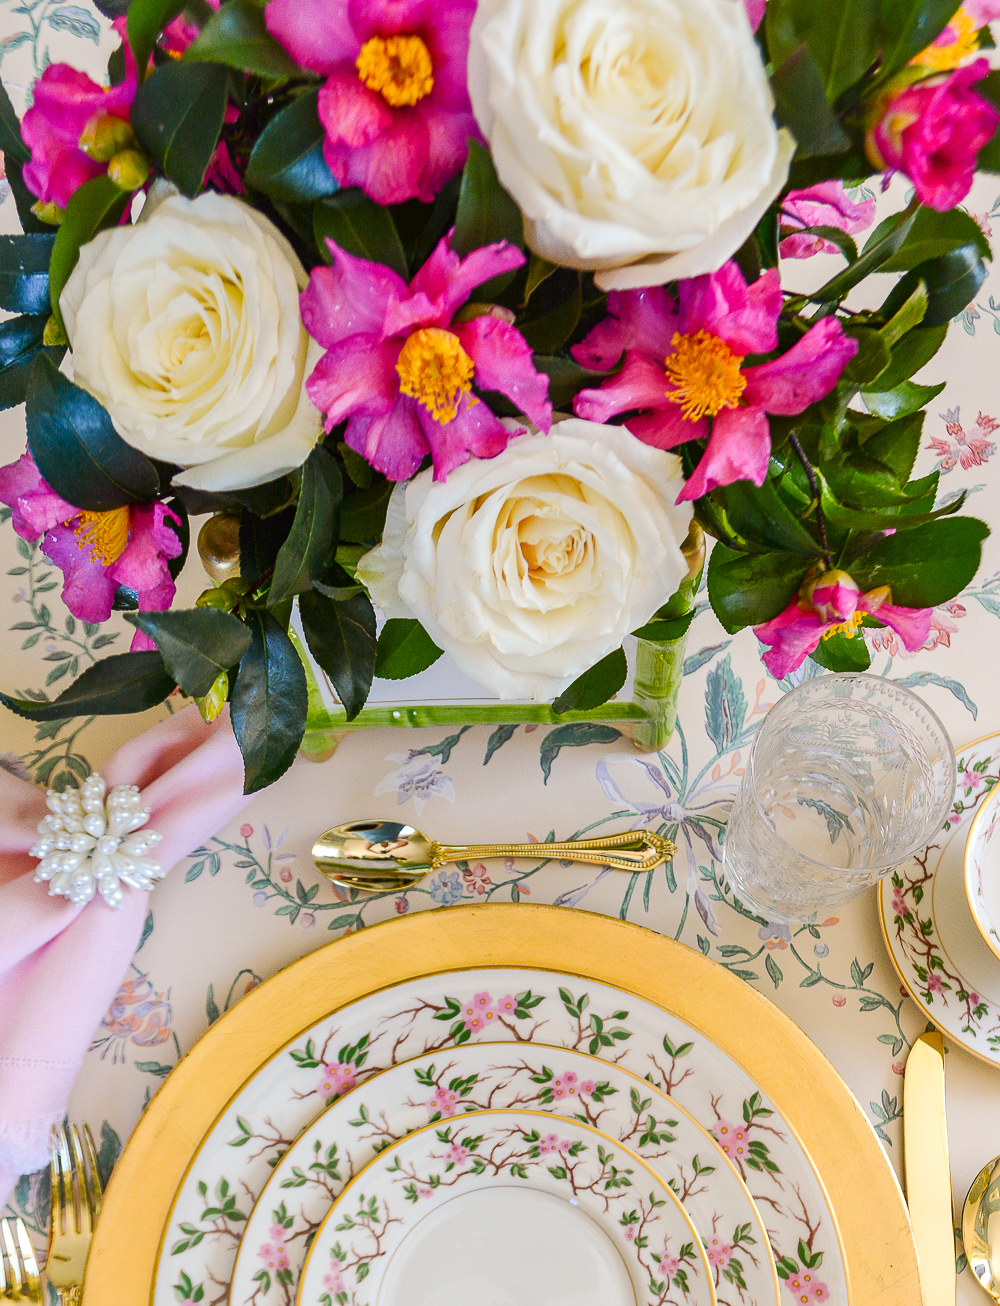 detail view of the rose and pink camellia centerpiece 